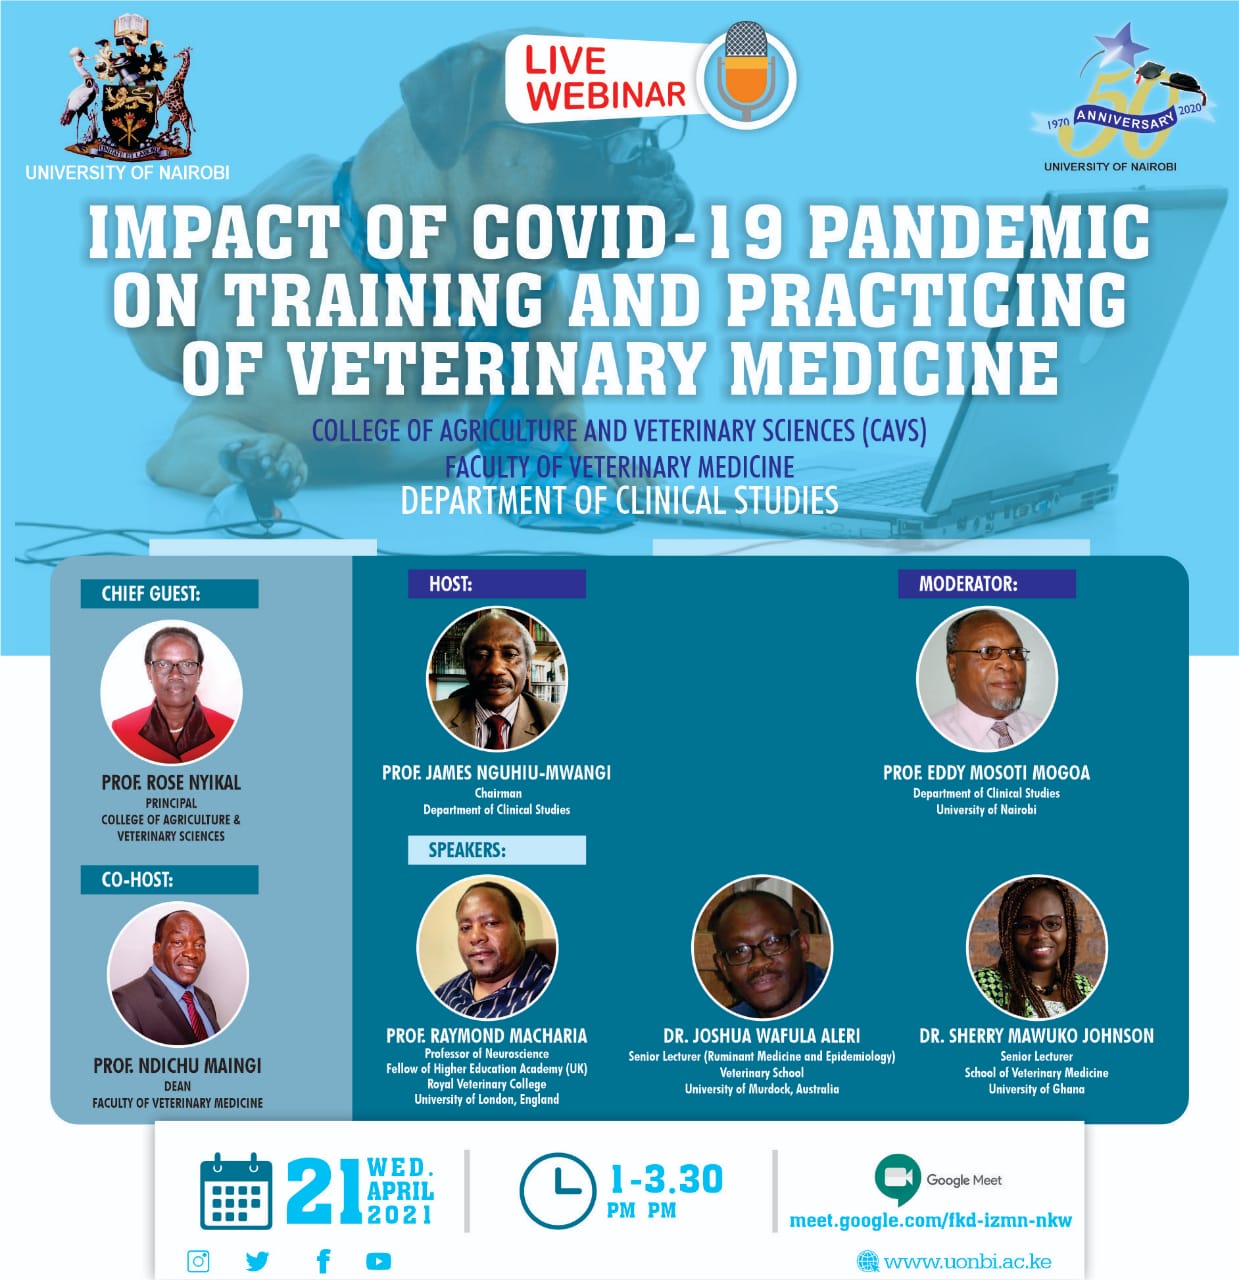 ONLINE WEBINAR - Impact of Covid-19 pandemic on training and practicing of veterinary medicine